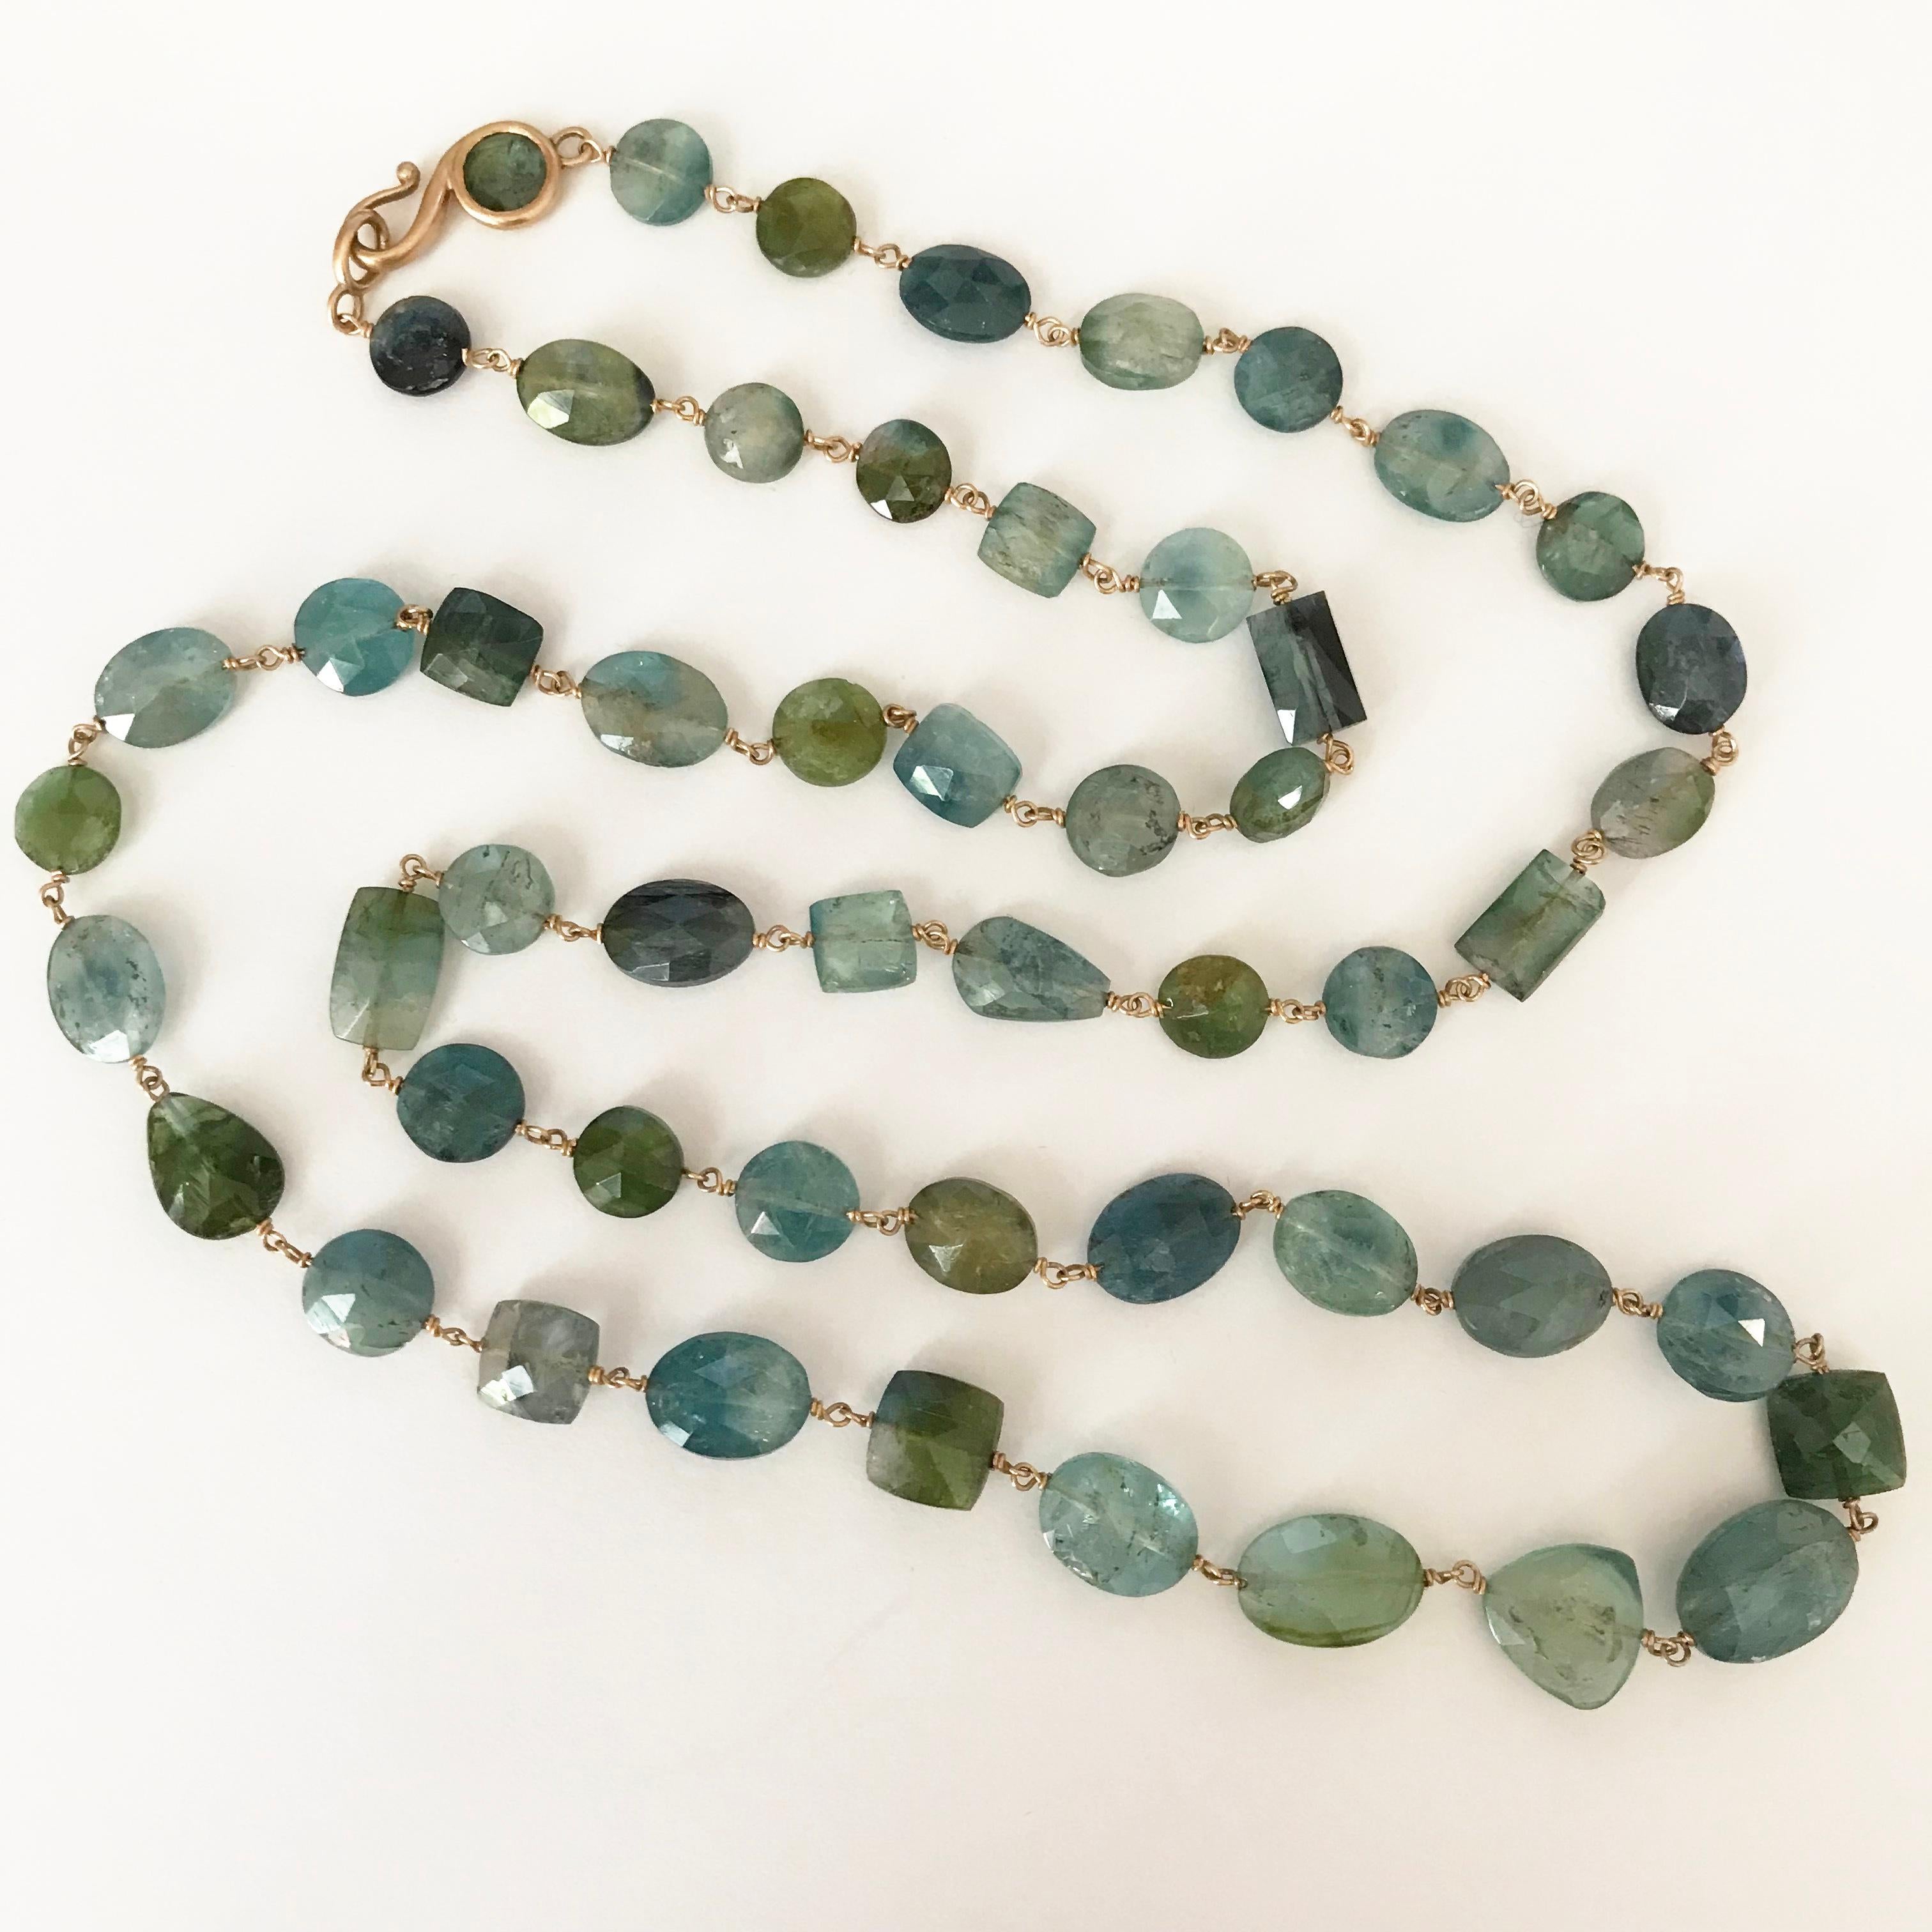 Dalben design hand crafted necklace composed of 120 carat mixed faceted cut natural  green tourmaline and 18 k rose gold in rosary style. 
the rose gold closure have a stone-setted round faceted tourmaline 
The necklace length is 28 inch (71 cm)